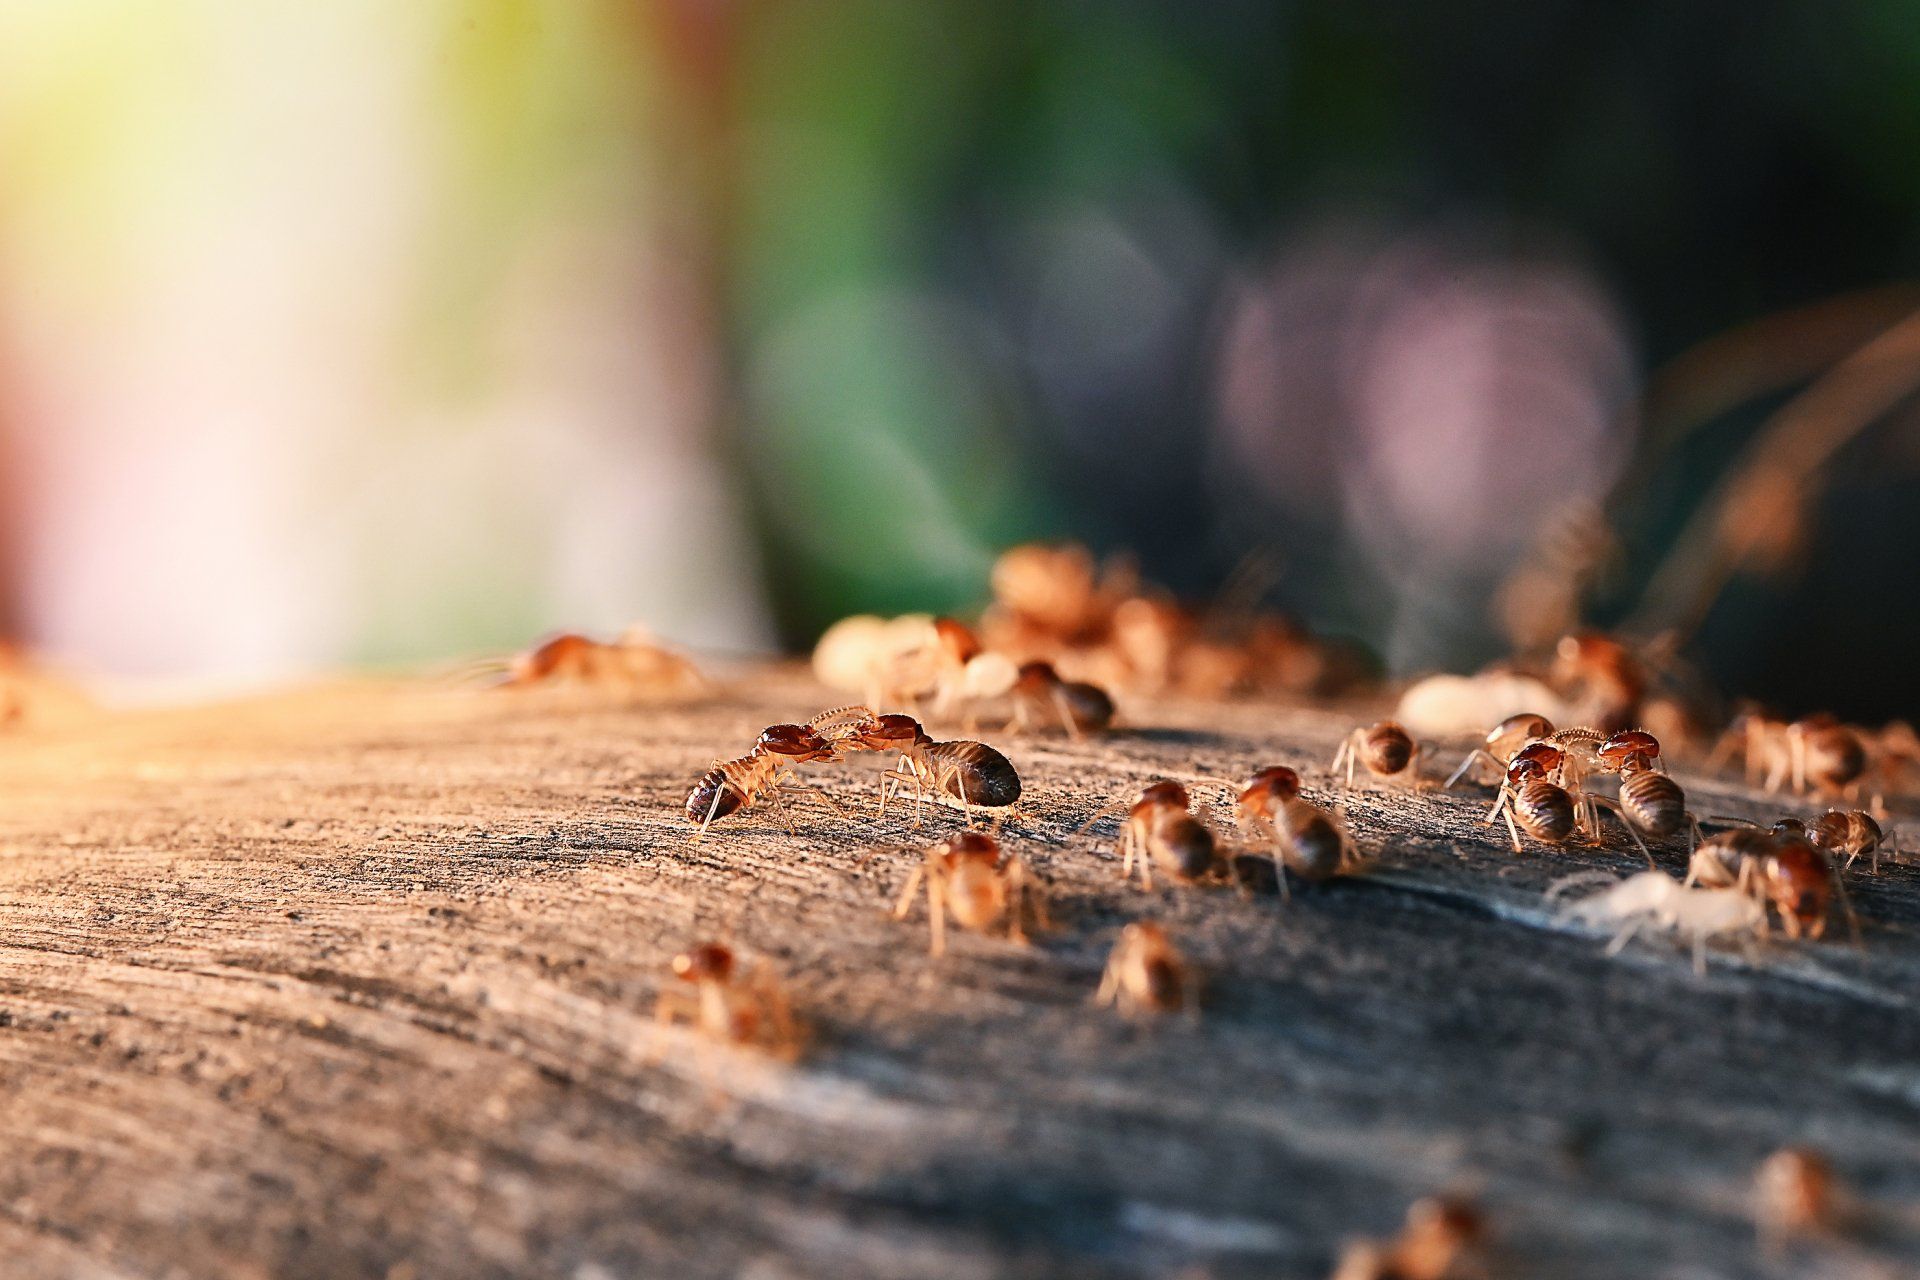 Ant pest control in weymouth ma